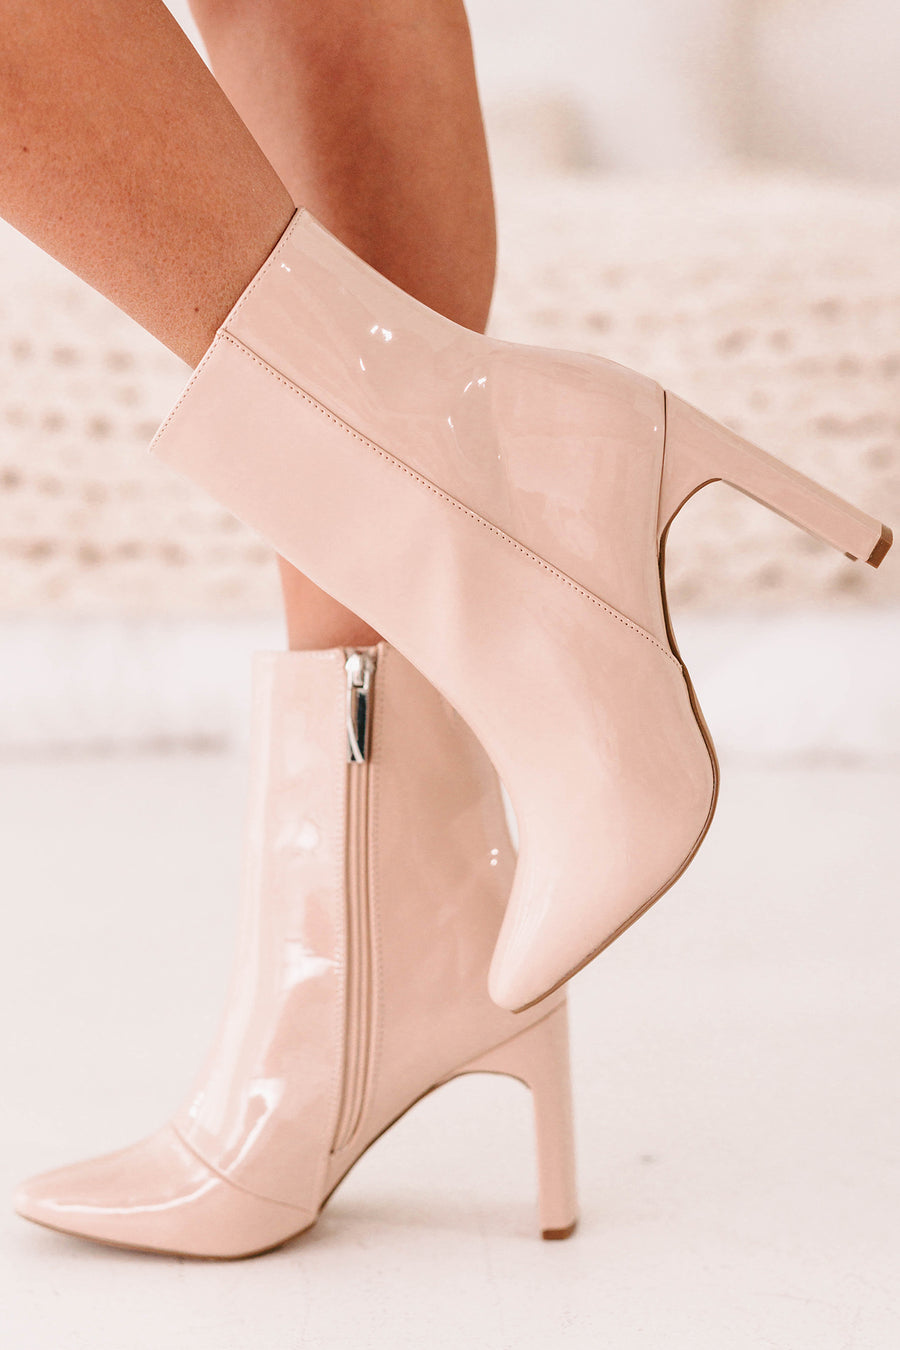 IMPERFECT First Strike High Gloss Patent Leather Bootie (Nude Patent) - NanaMacs